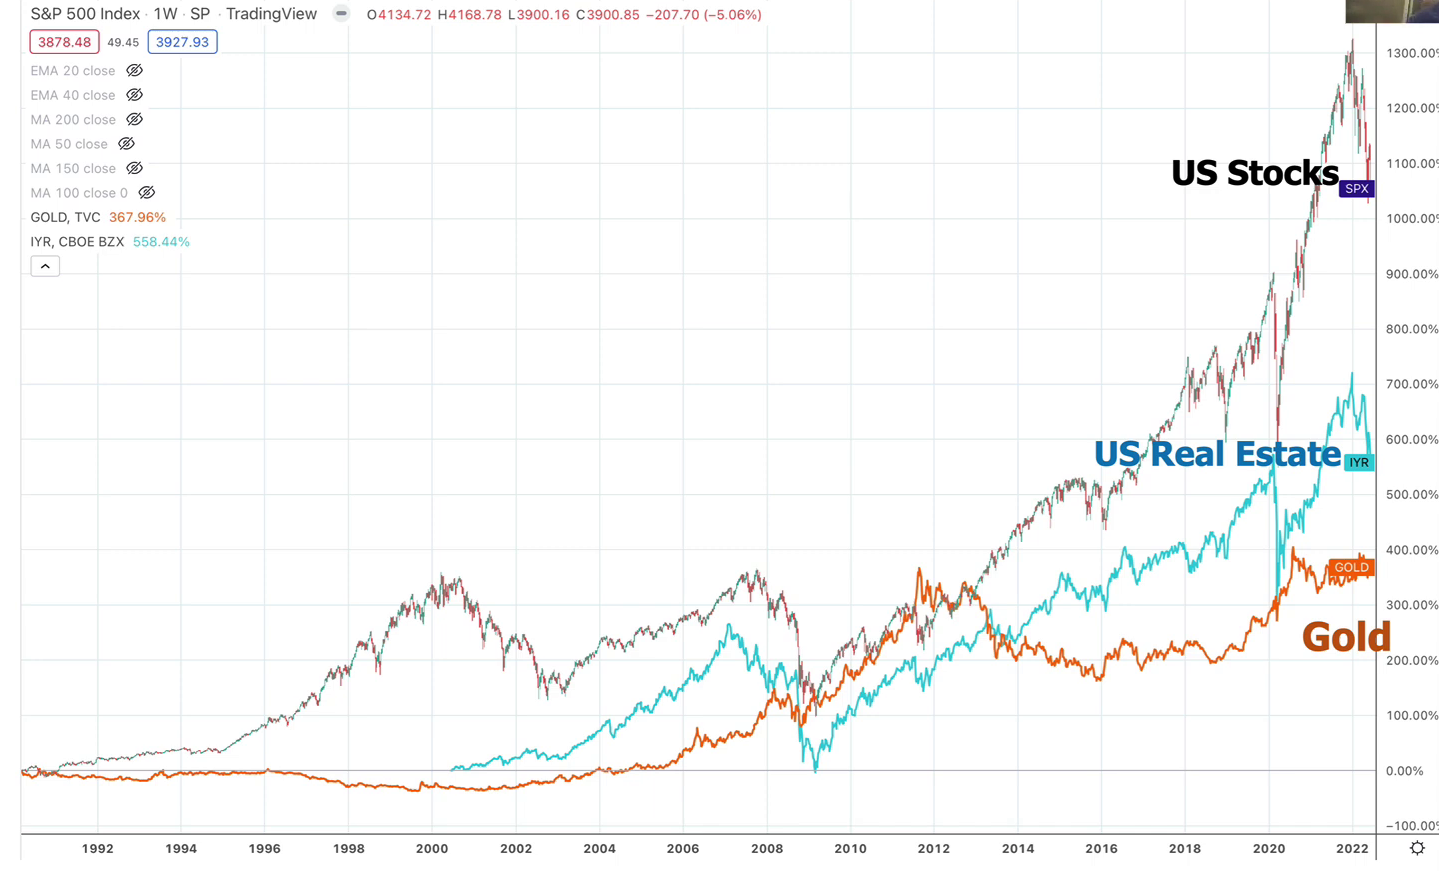 US Stocks x US Real Estate x Gold